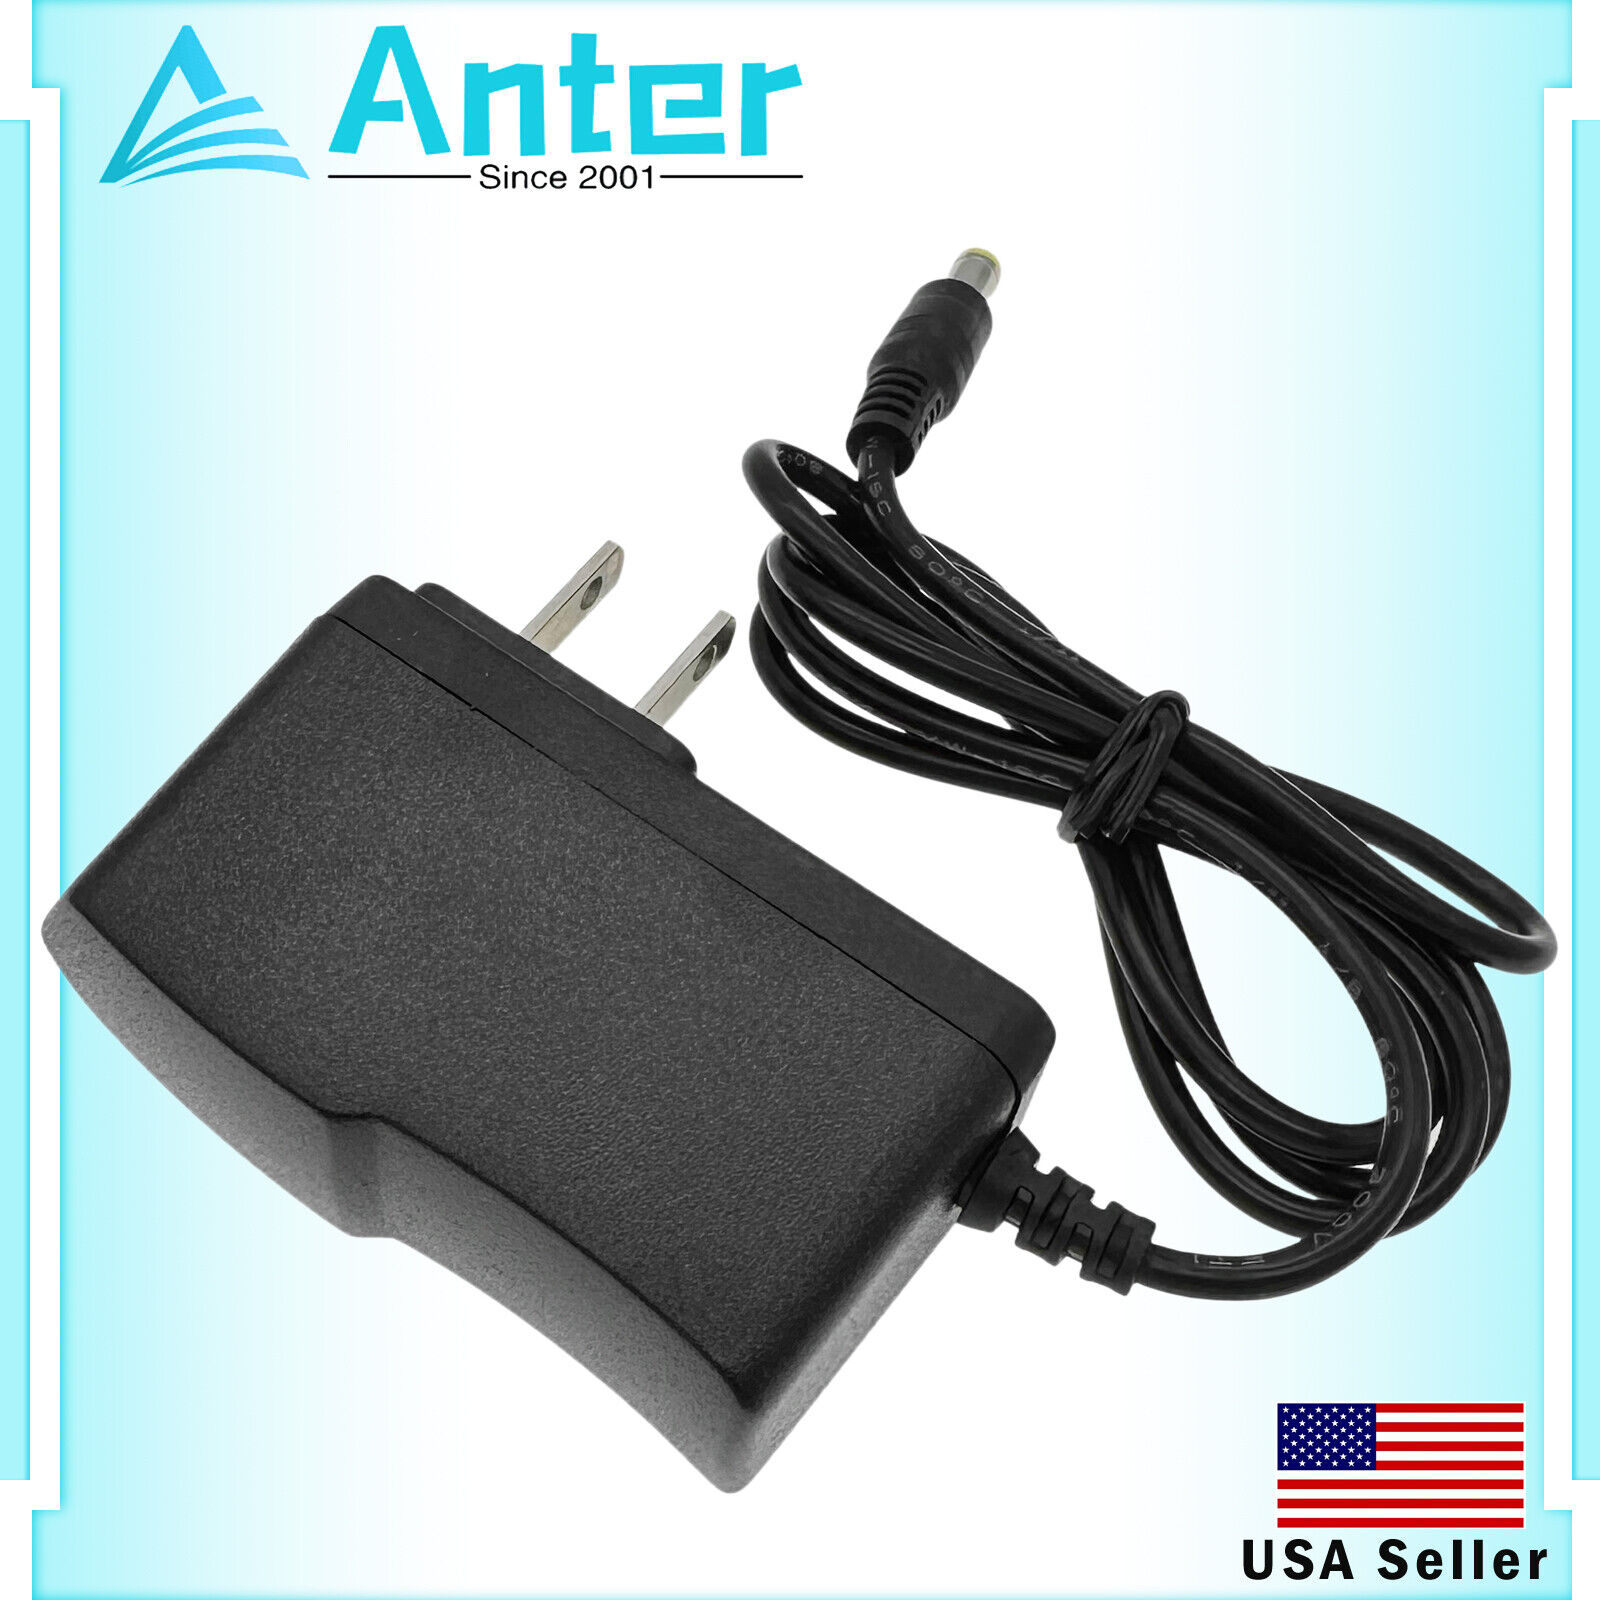 9V AC DC Adapter Charger For Casio CTK-4000 CTK-558 Keyboard Power Supply Cord